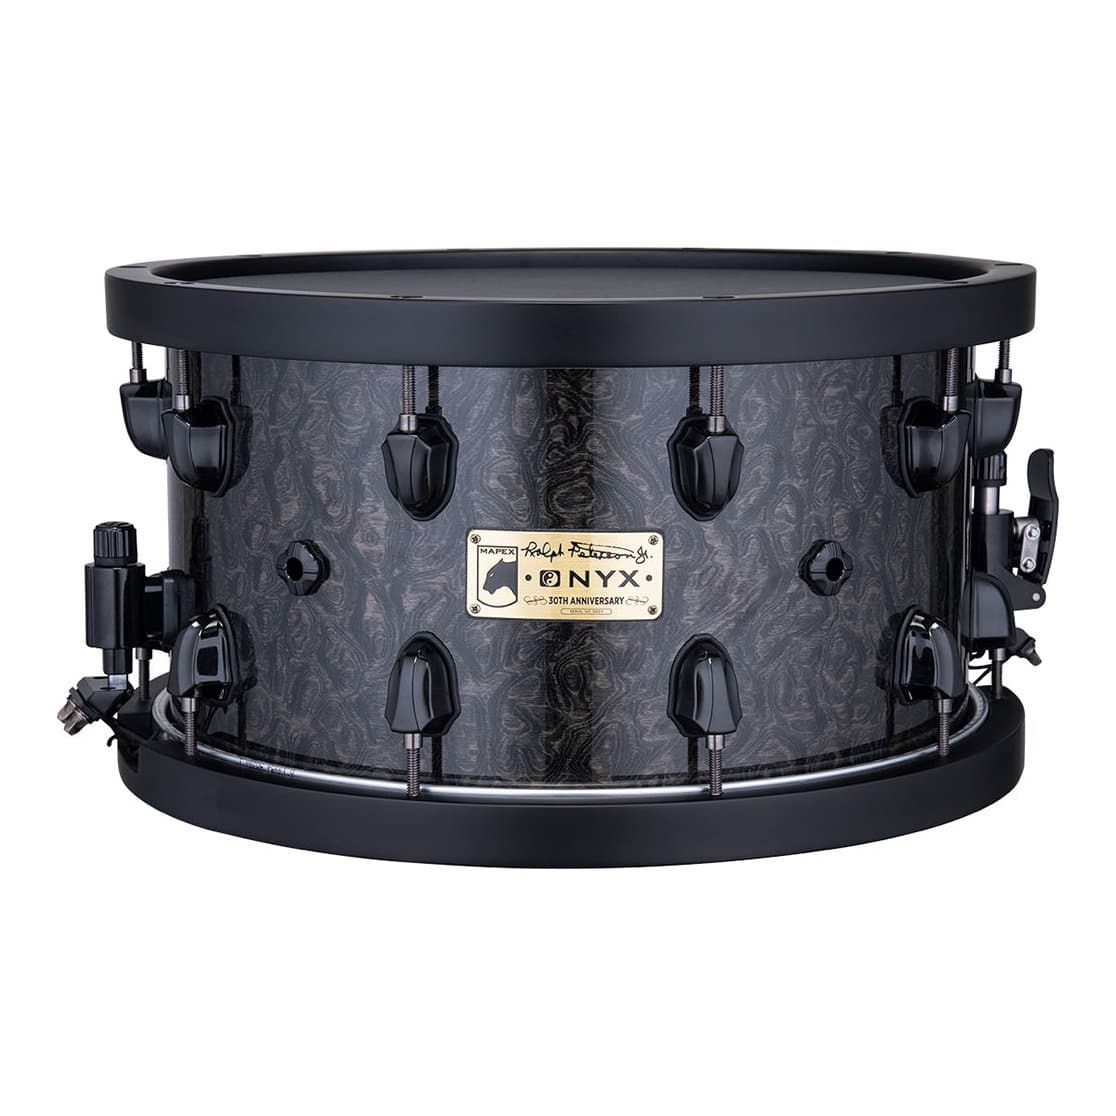 10 Signature Snare Drums We Love - Which Is Best For You? | DCP